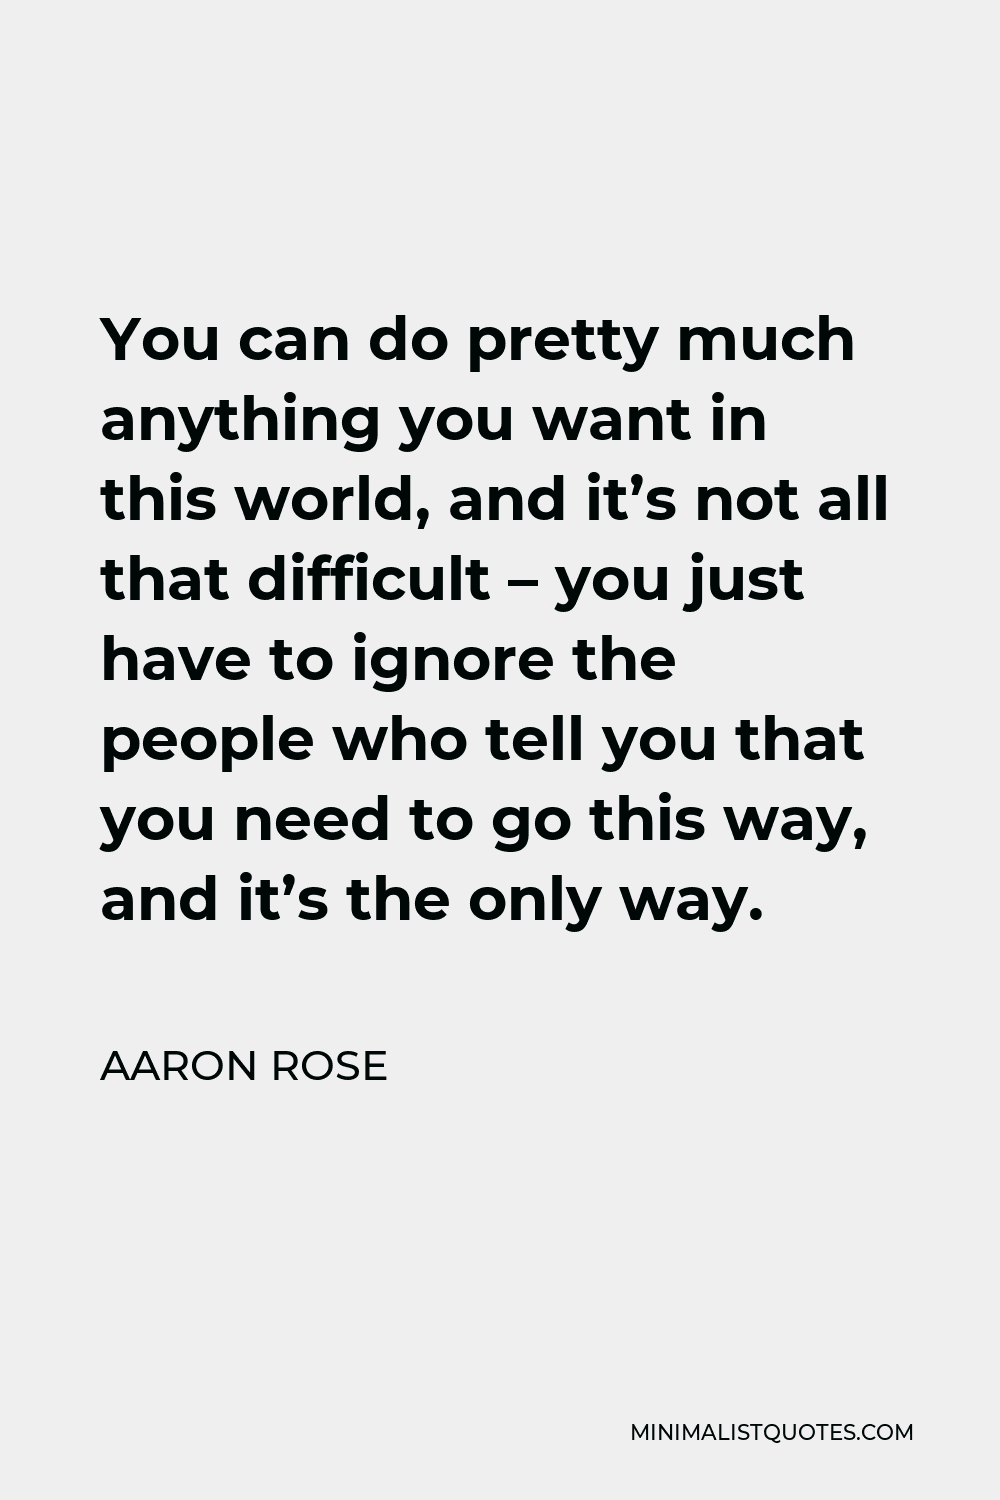 Aaron Rose Quote - You can do pretty much anything you want in this world, and it’s not all that difficult – you just have to ignore the people who tell you that you need to go this way, and it’s the only way.